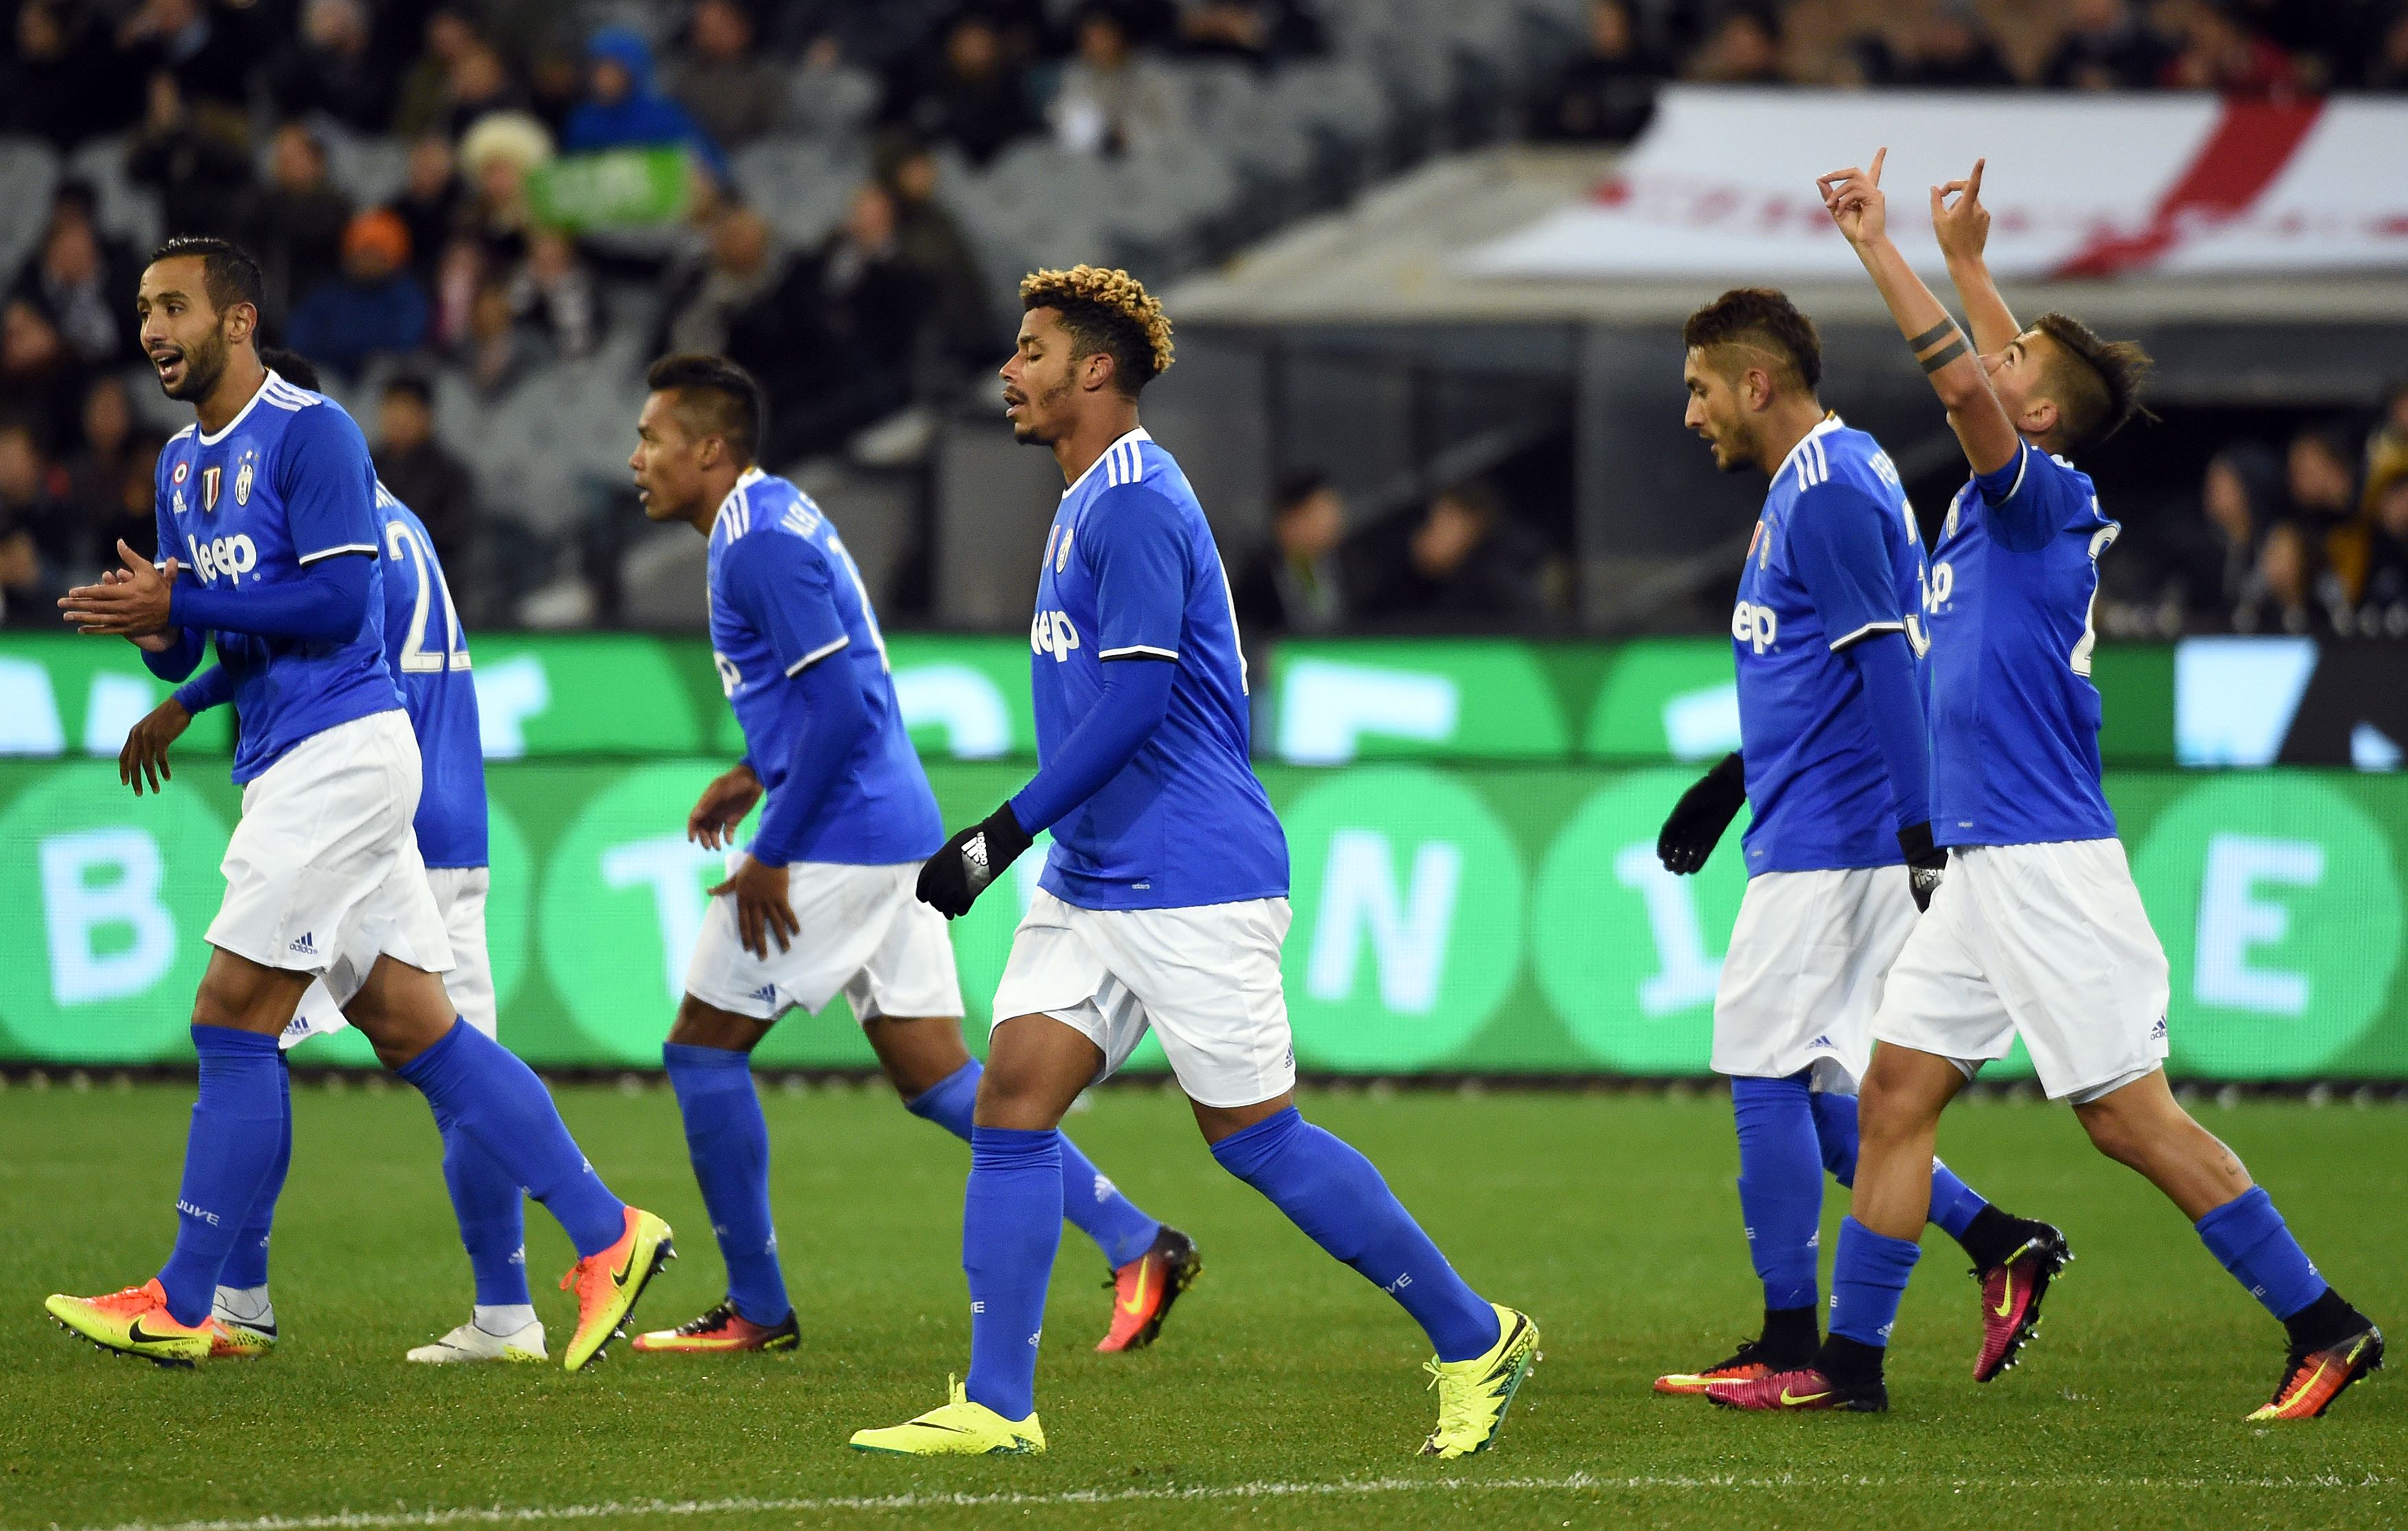 Juventus' players celebrate their first goal during the International Champions Cup football match between Italy's Serie A team Juventus and Premier League team Tottenham Hotspur in Melbourne on July 26, 2016.  / AFP / SAEED KHAN / IMAGE RESTRICTED TO EDITORIAL USE - STRICTLY NO COMMERCIAL USE        (Photo credit should read SAEED KHAN/AFP/Getty Images)